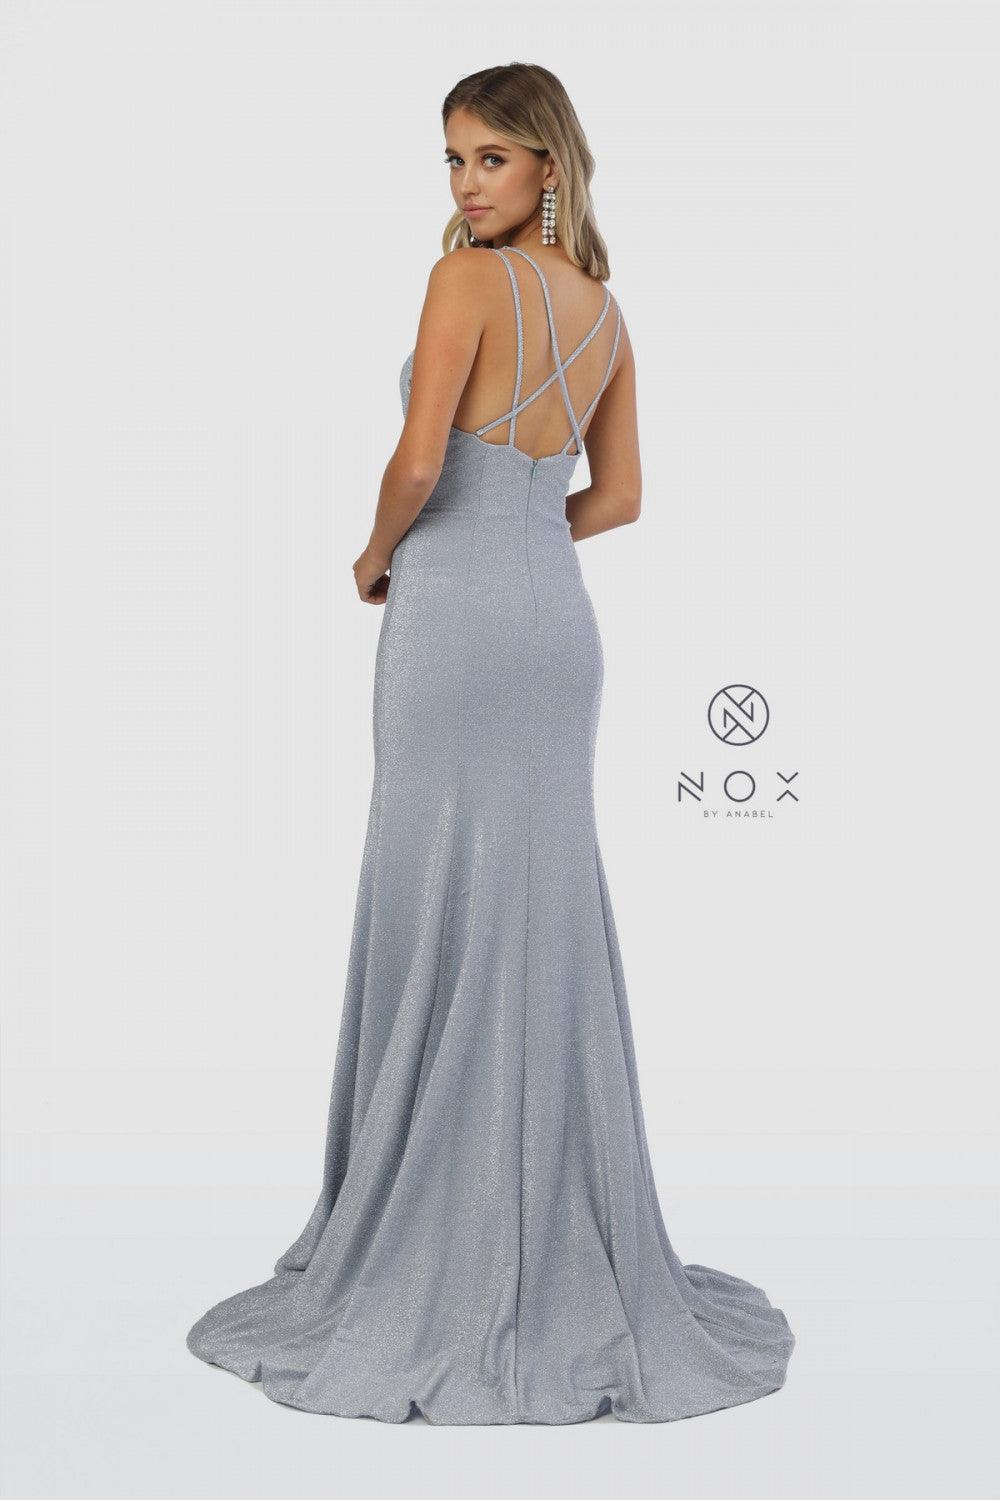 Long Sexy High Slit Prom Dress Evening Gown - The Dress Outlet Nox Anabel